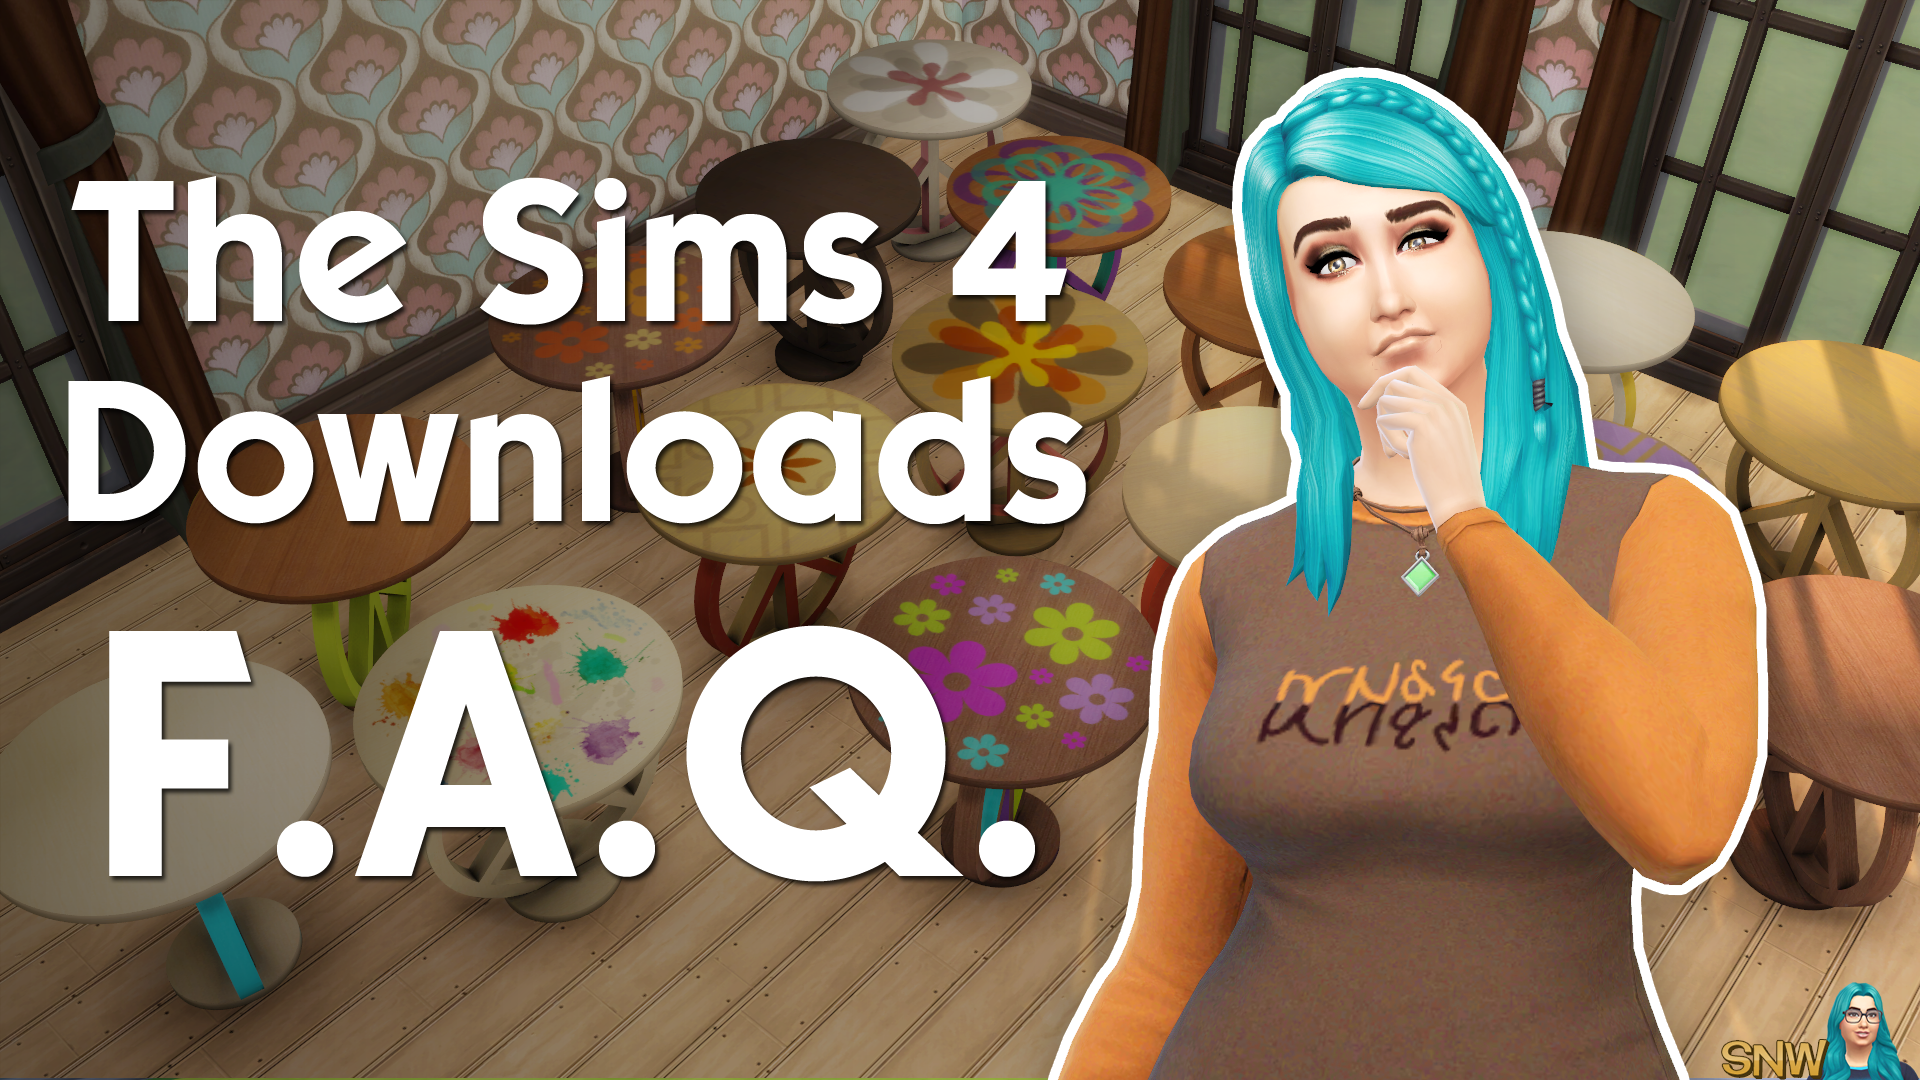 The Sims 4 Downloads Help